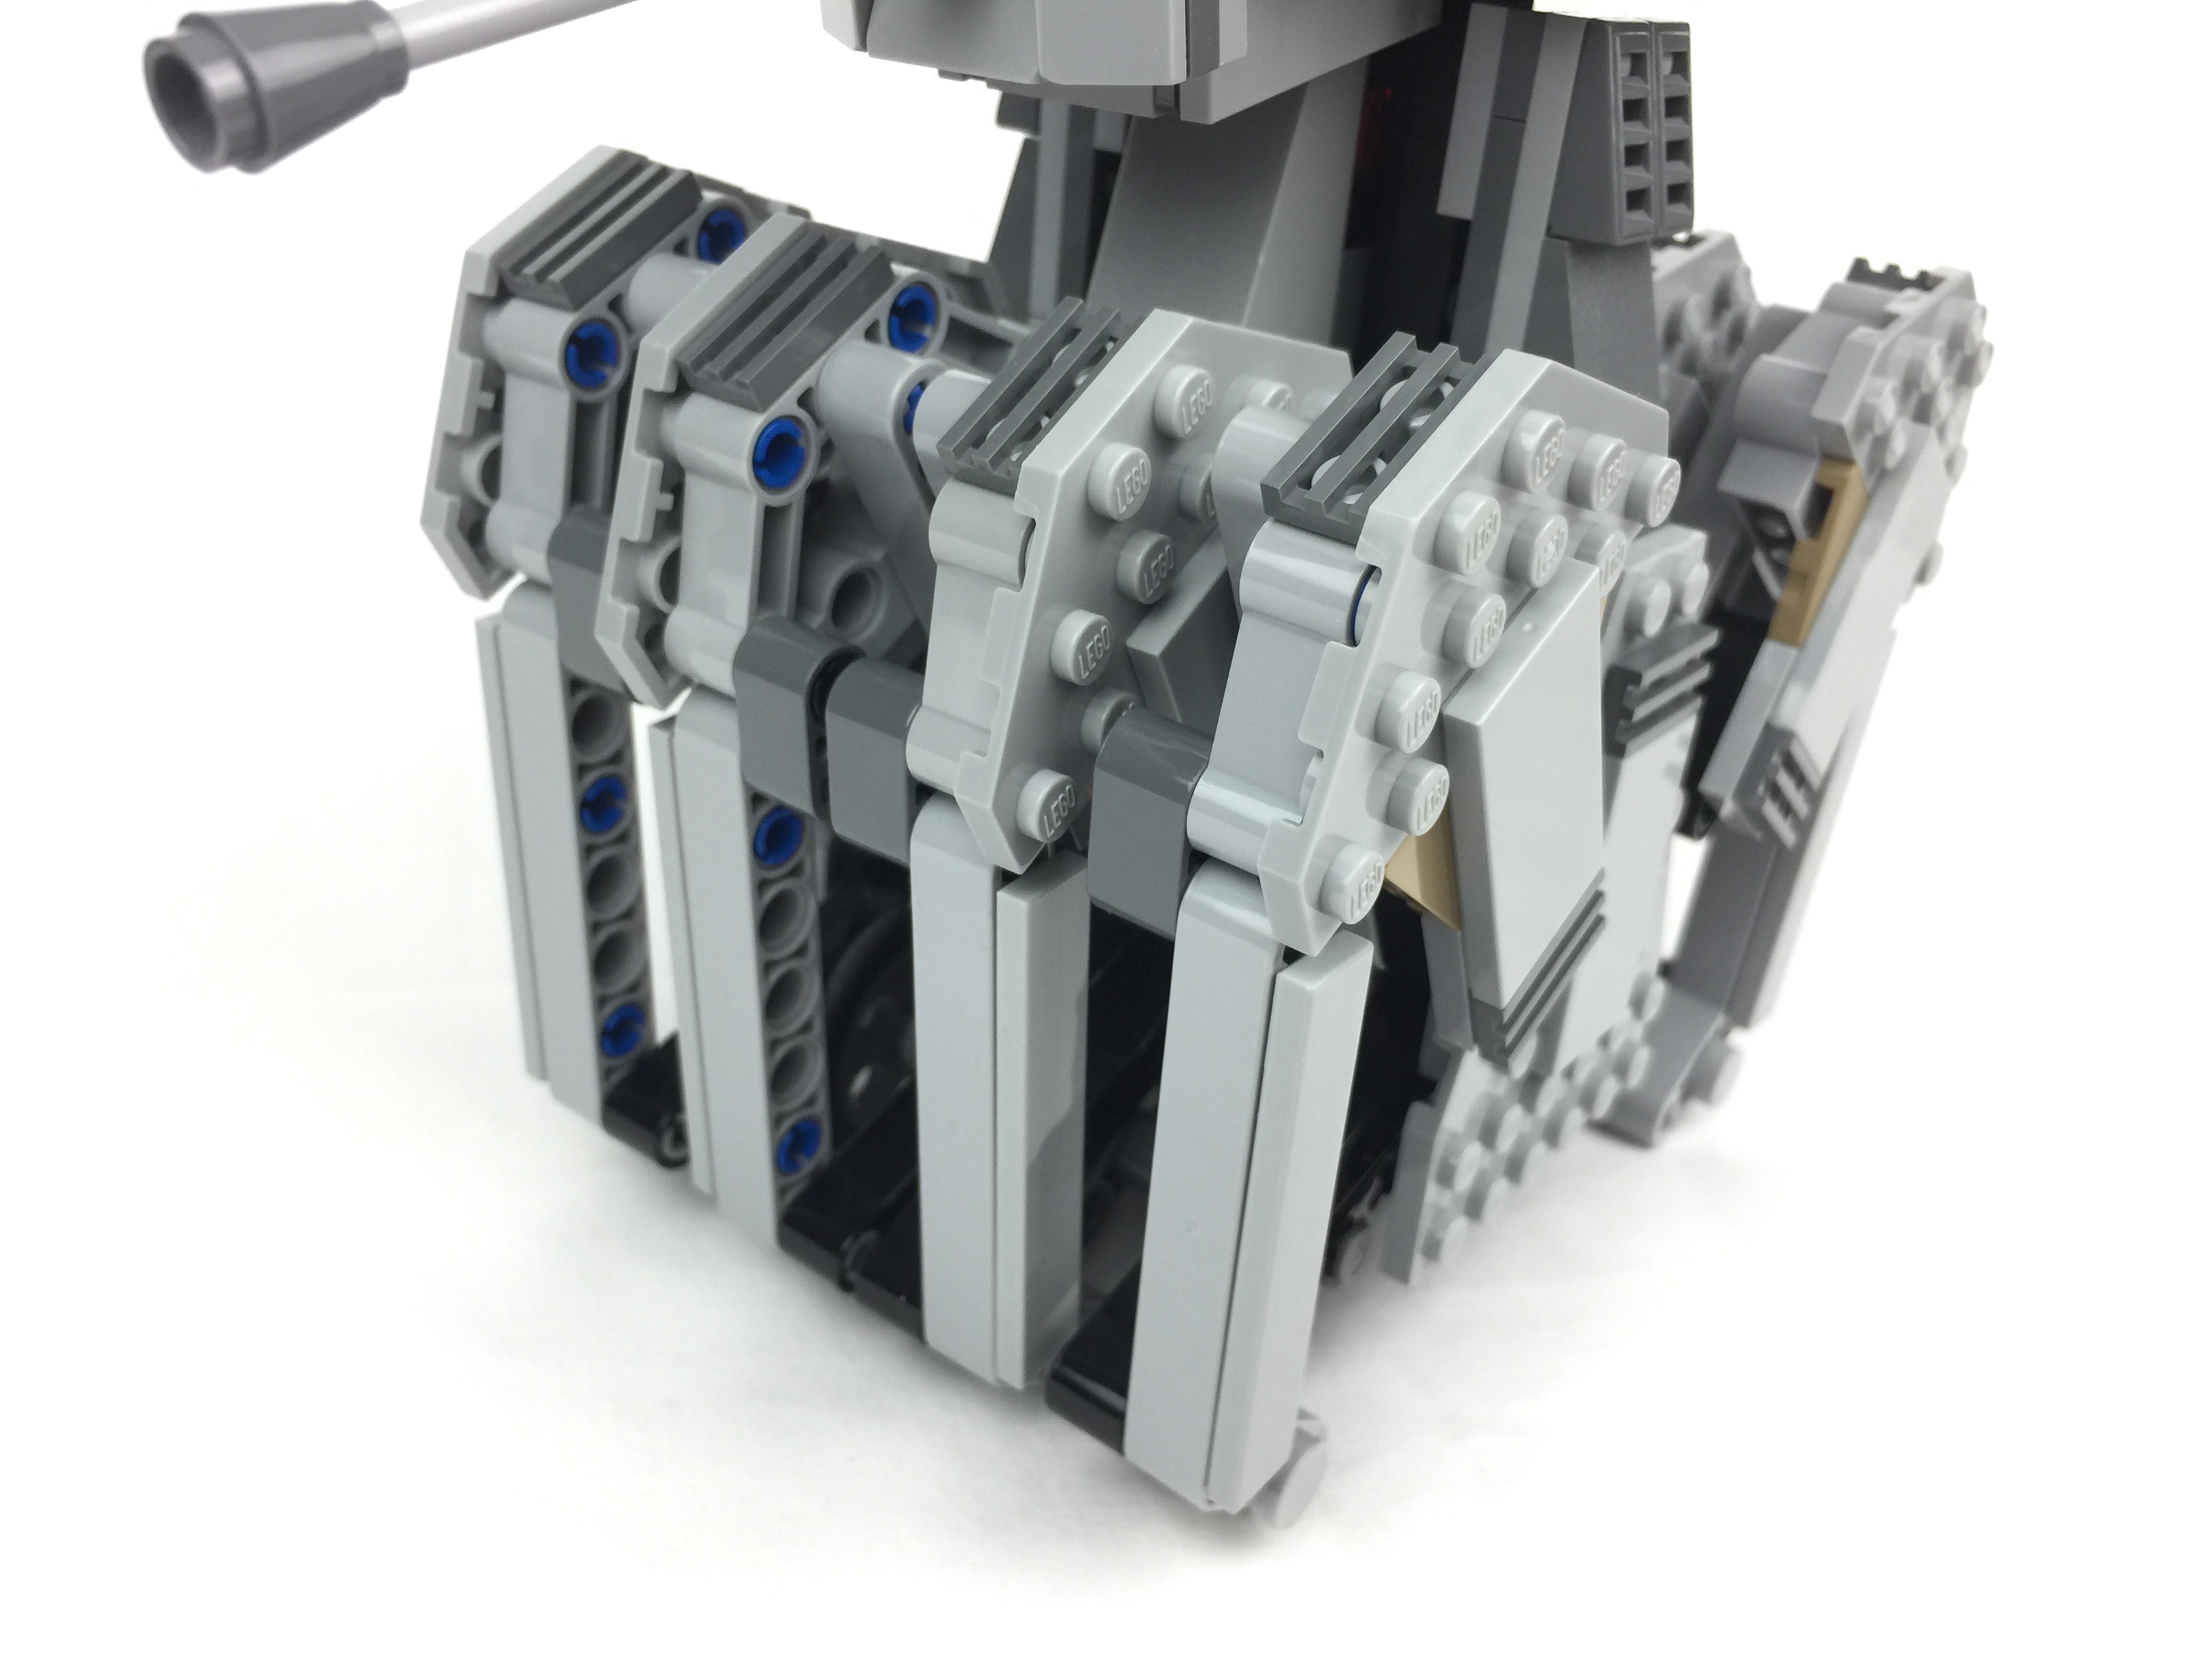 Review: 75177 First Order Heavy Scout Walker - FBTB